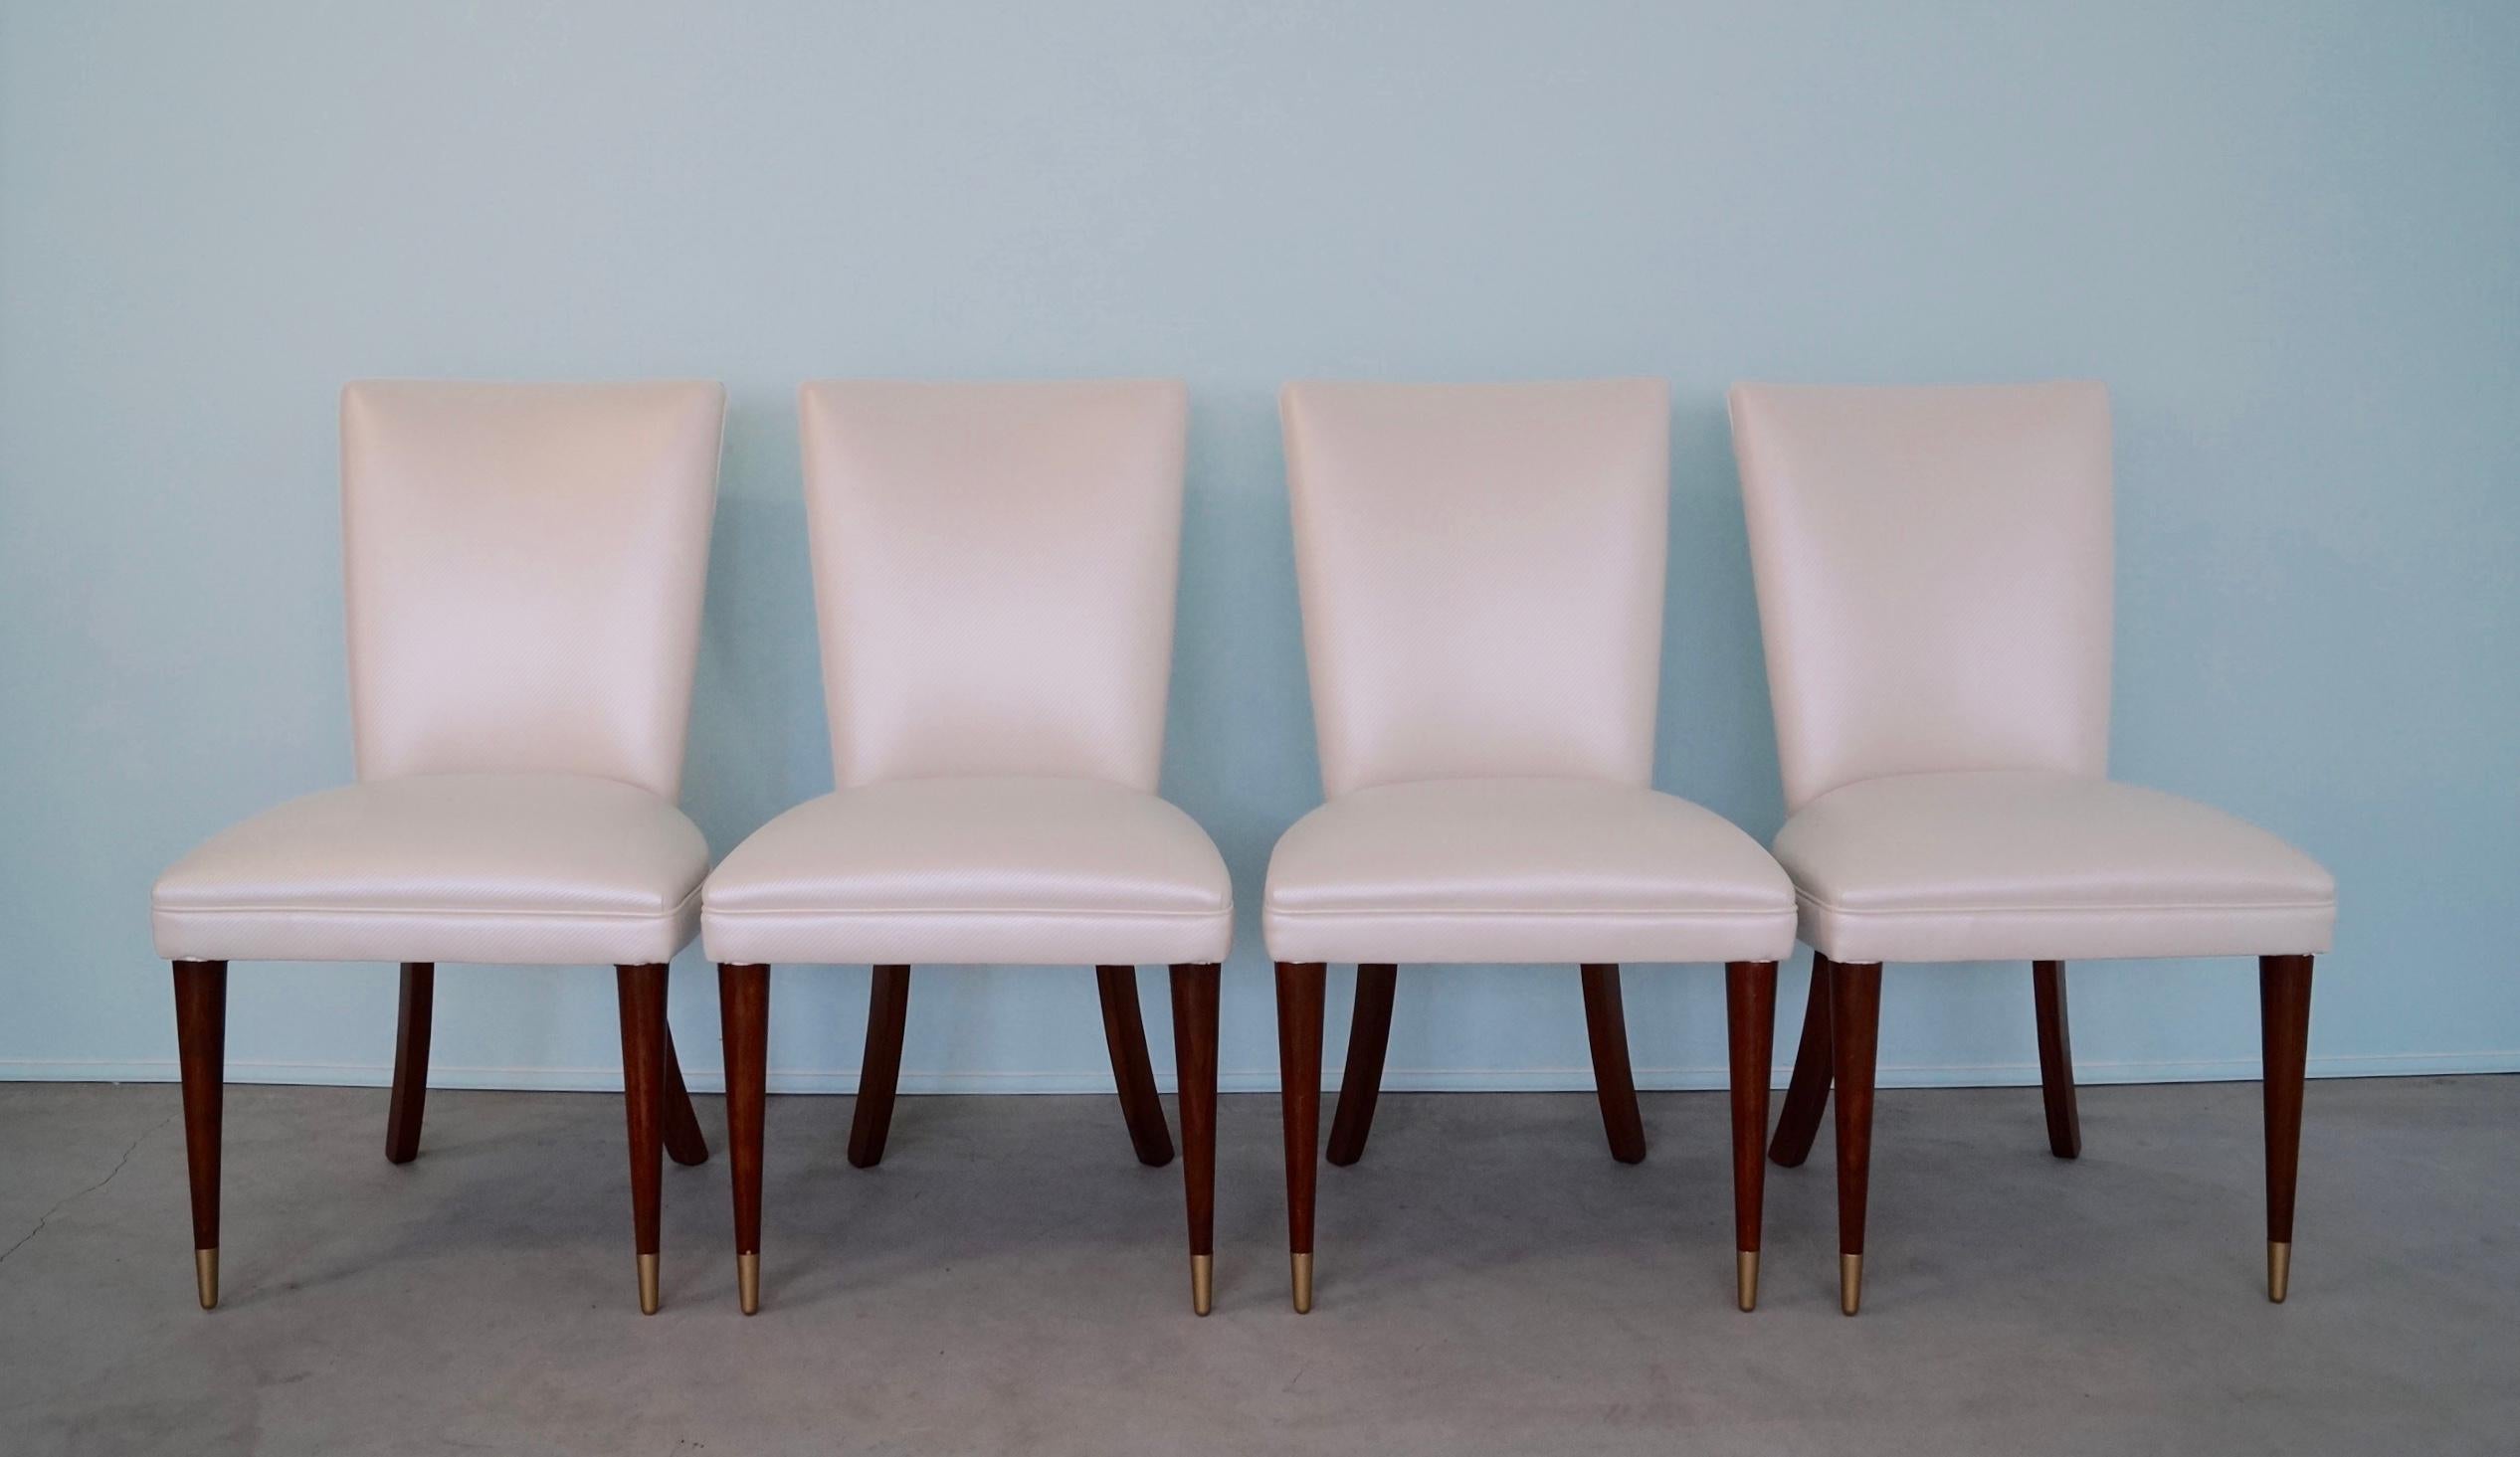 1950's Mid-Century Modern Hollywood Regency Dining Chairs - Set of 4 In Excellent Condition For Sale In Burbank, CA